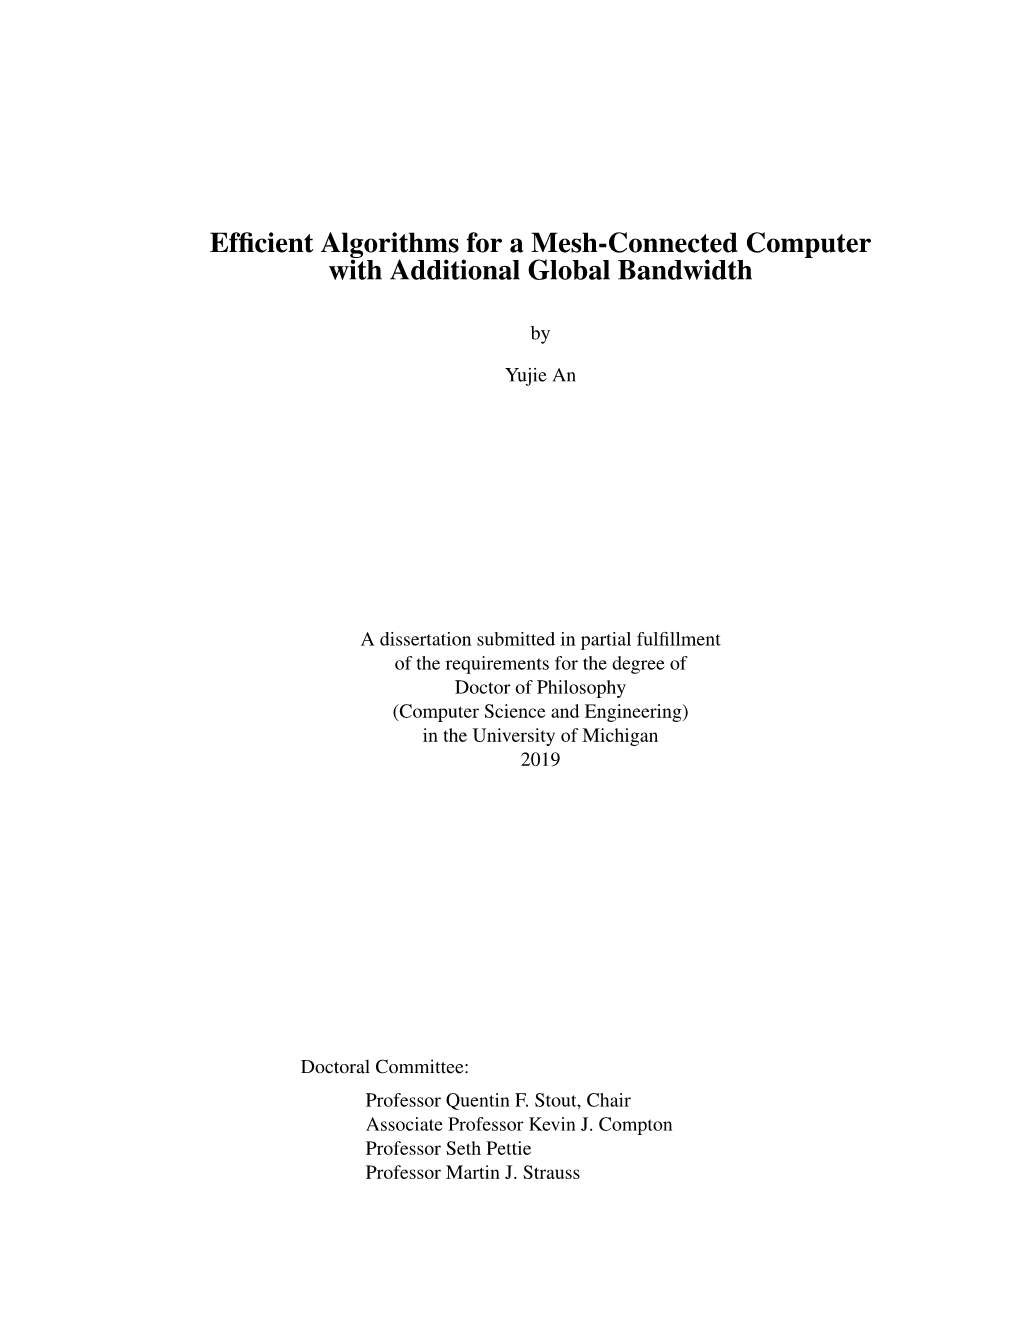 Efficient Algorithms for a Mesh-Connected Computer With